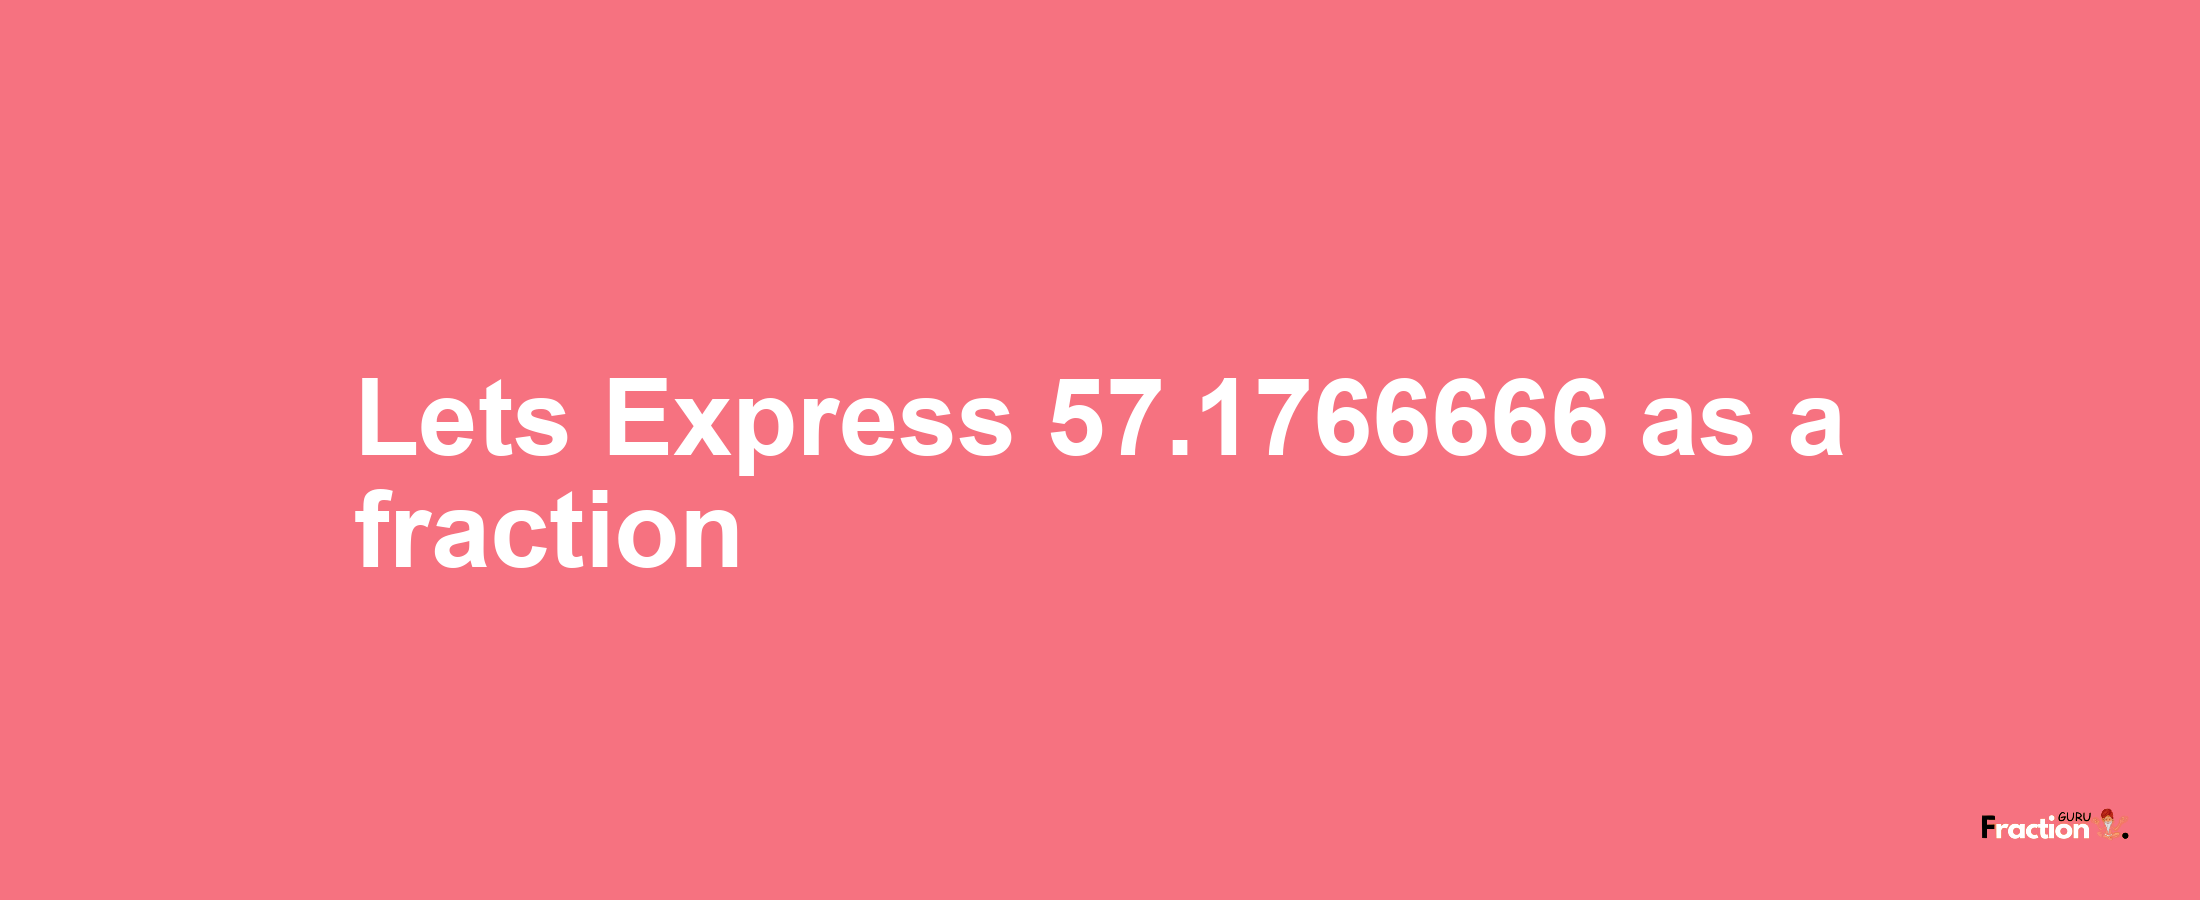 Lets Express 57.1766666 as afraction